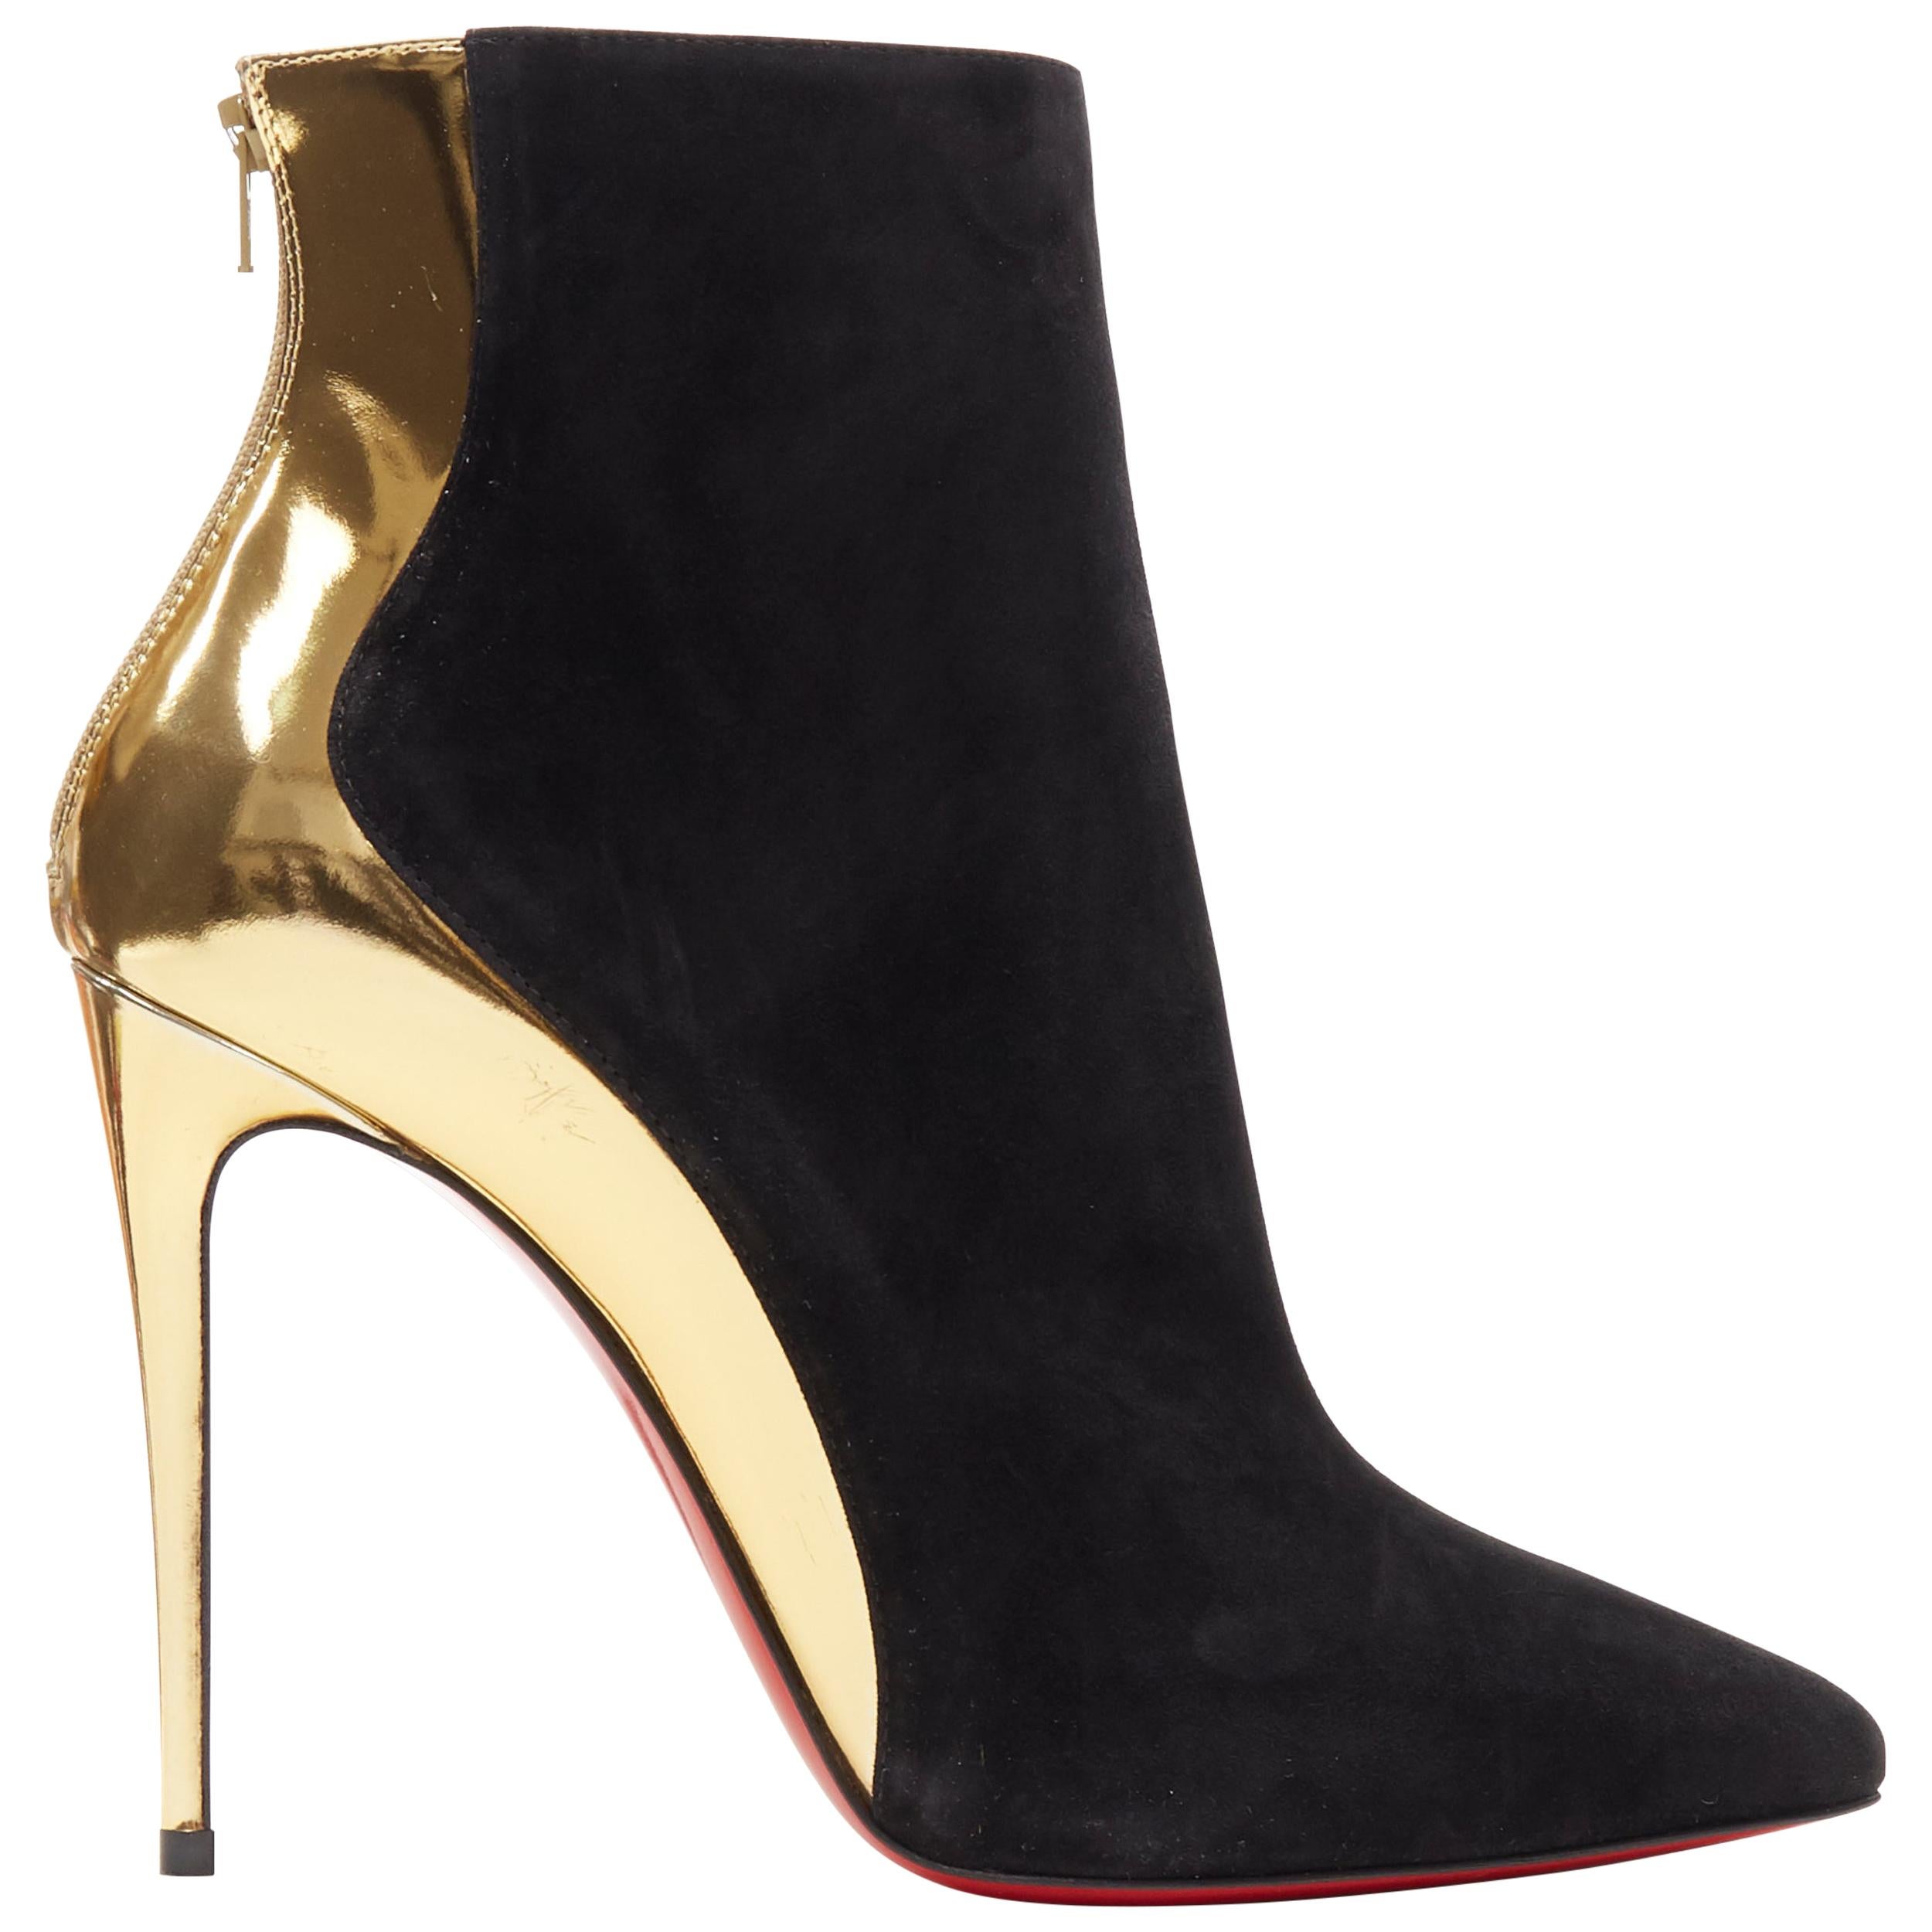 new CHRISTIAN LOUBOUTIN Delicotte 100 black suede gold mirrored heel bootie EU37